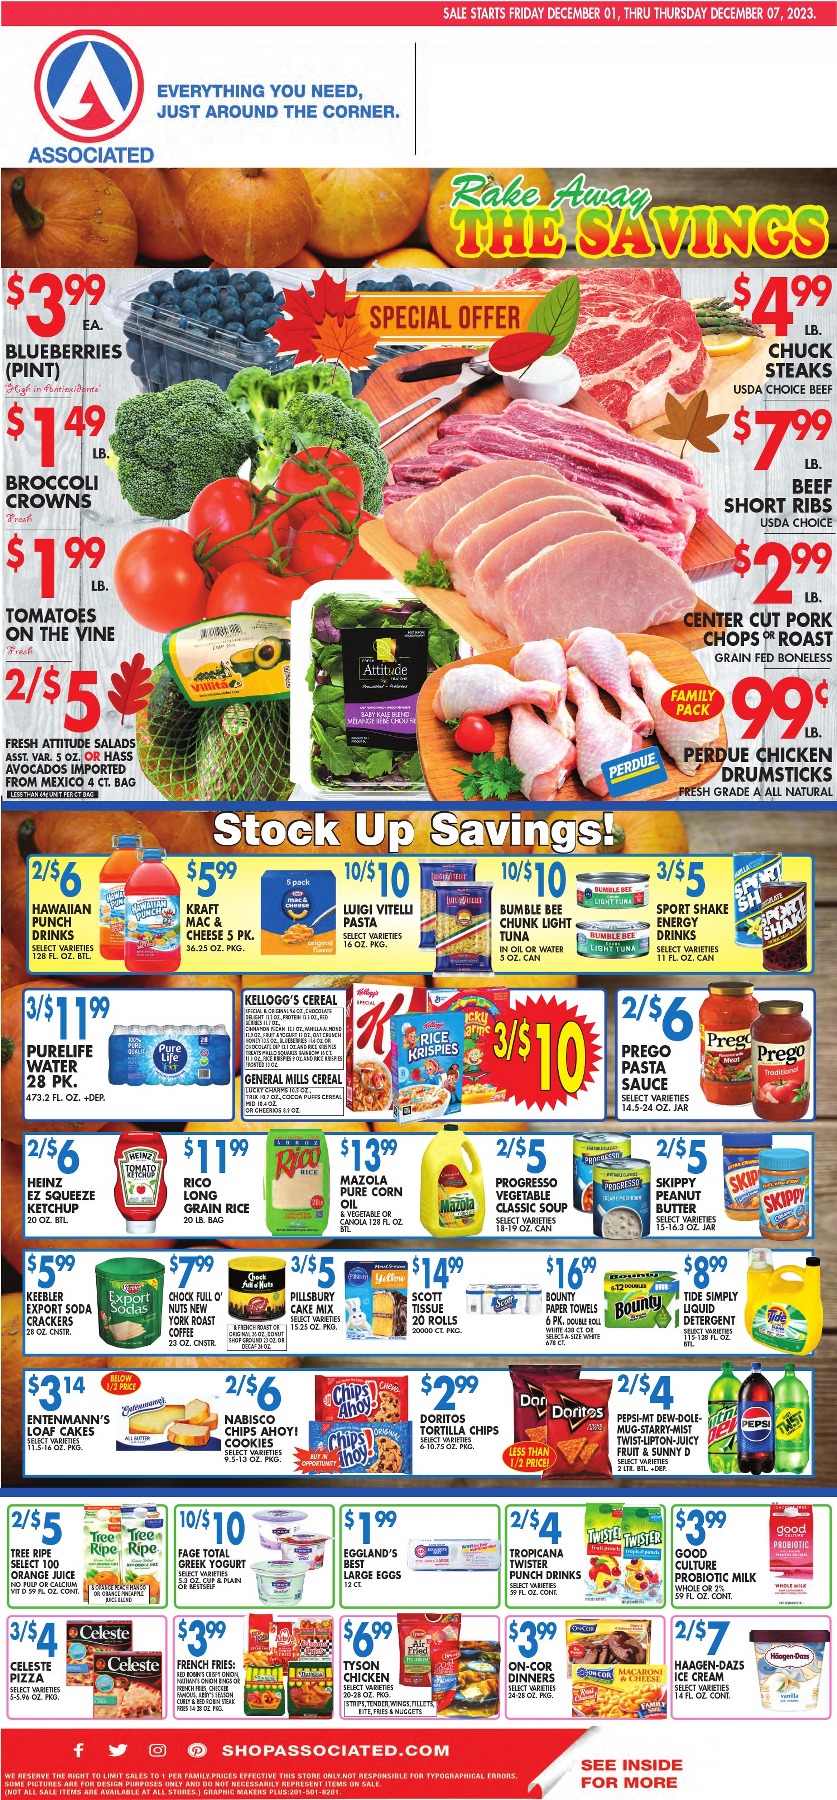 Associated Supermarkets Weekly Ad December 1 to December 7, 2023 1 – associated ad 1 3